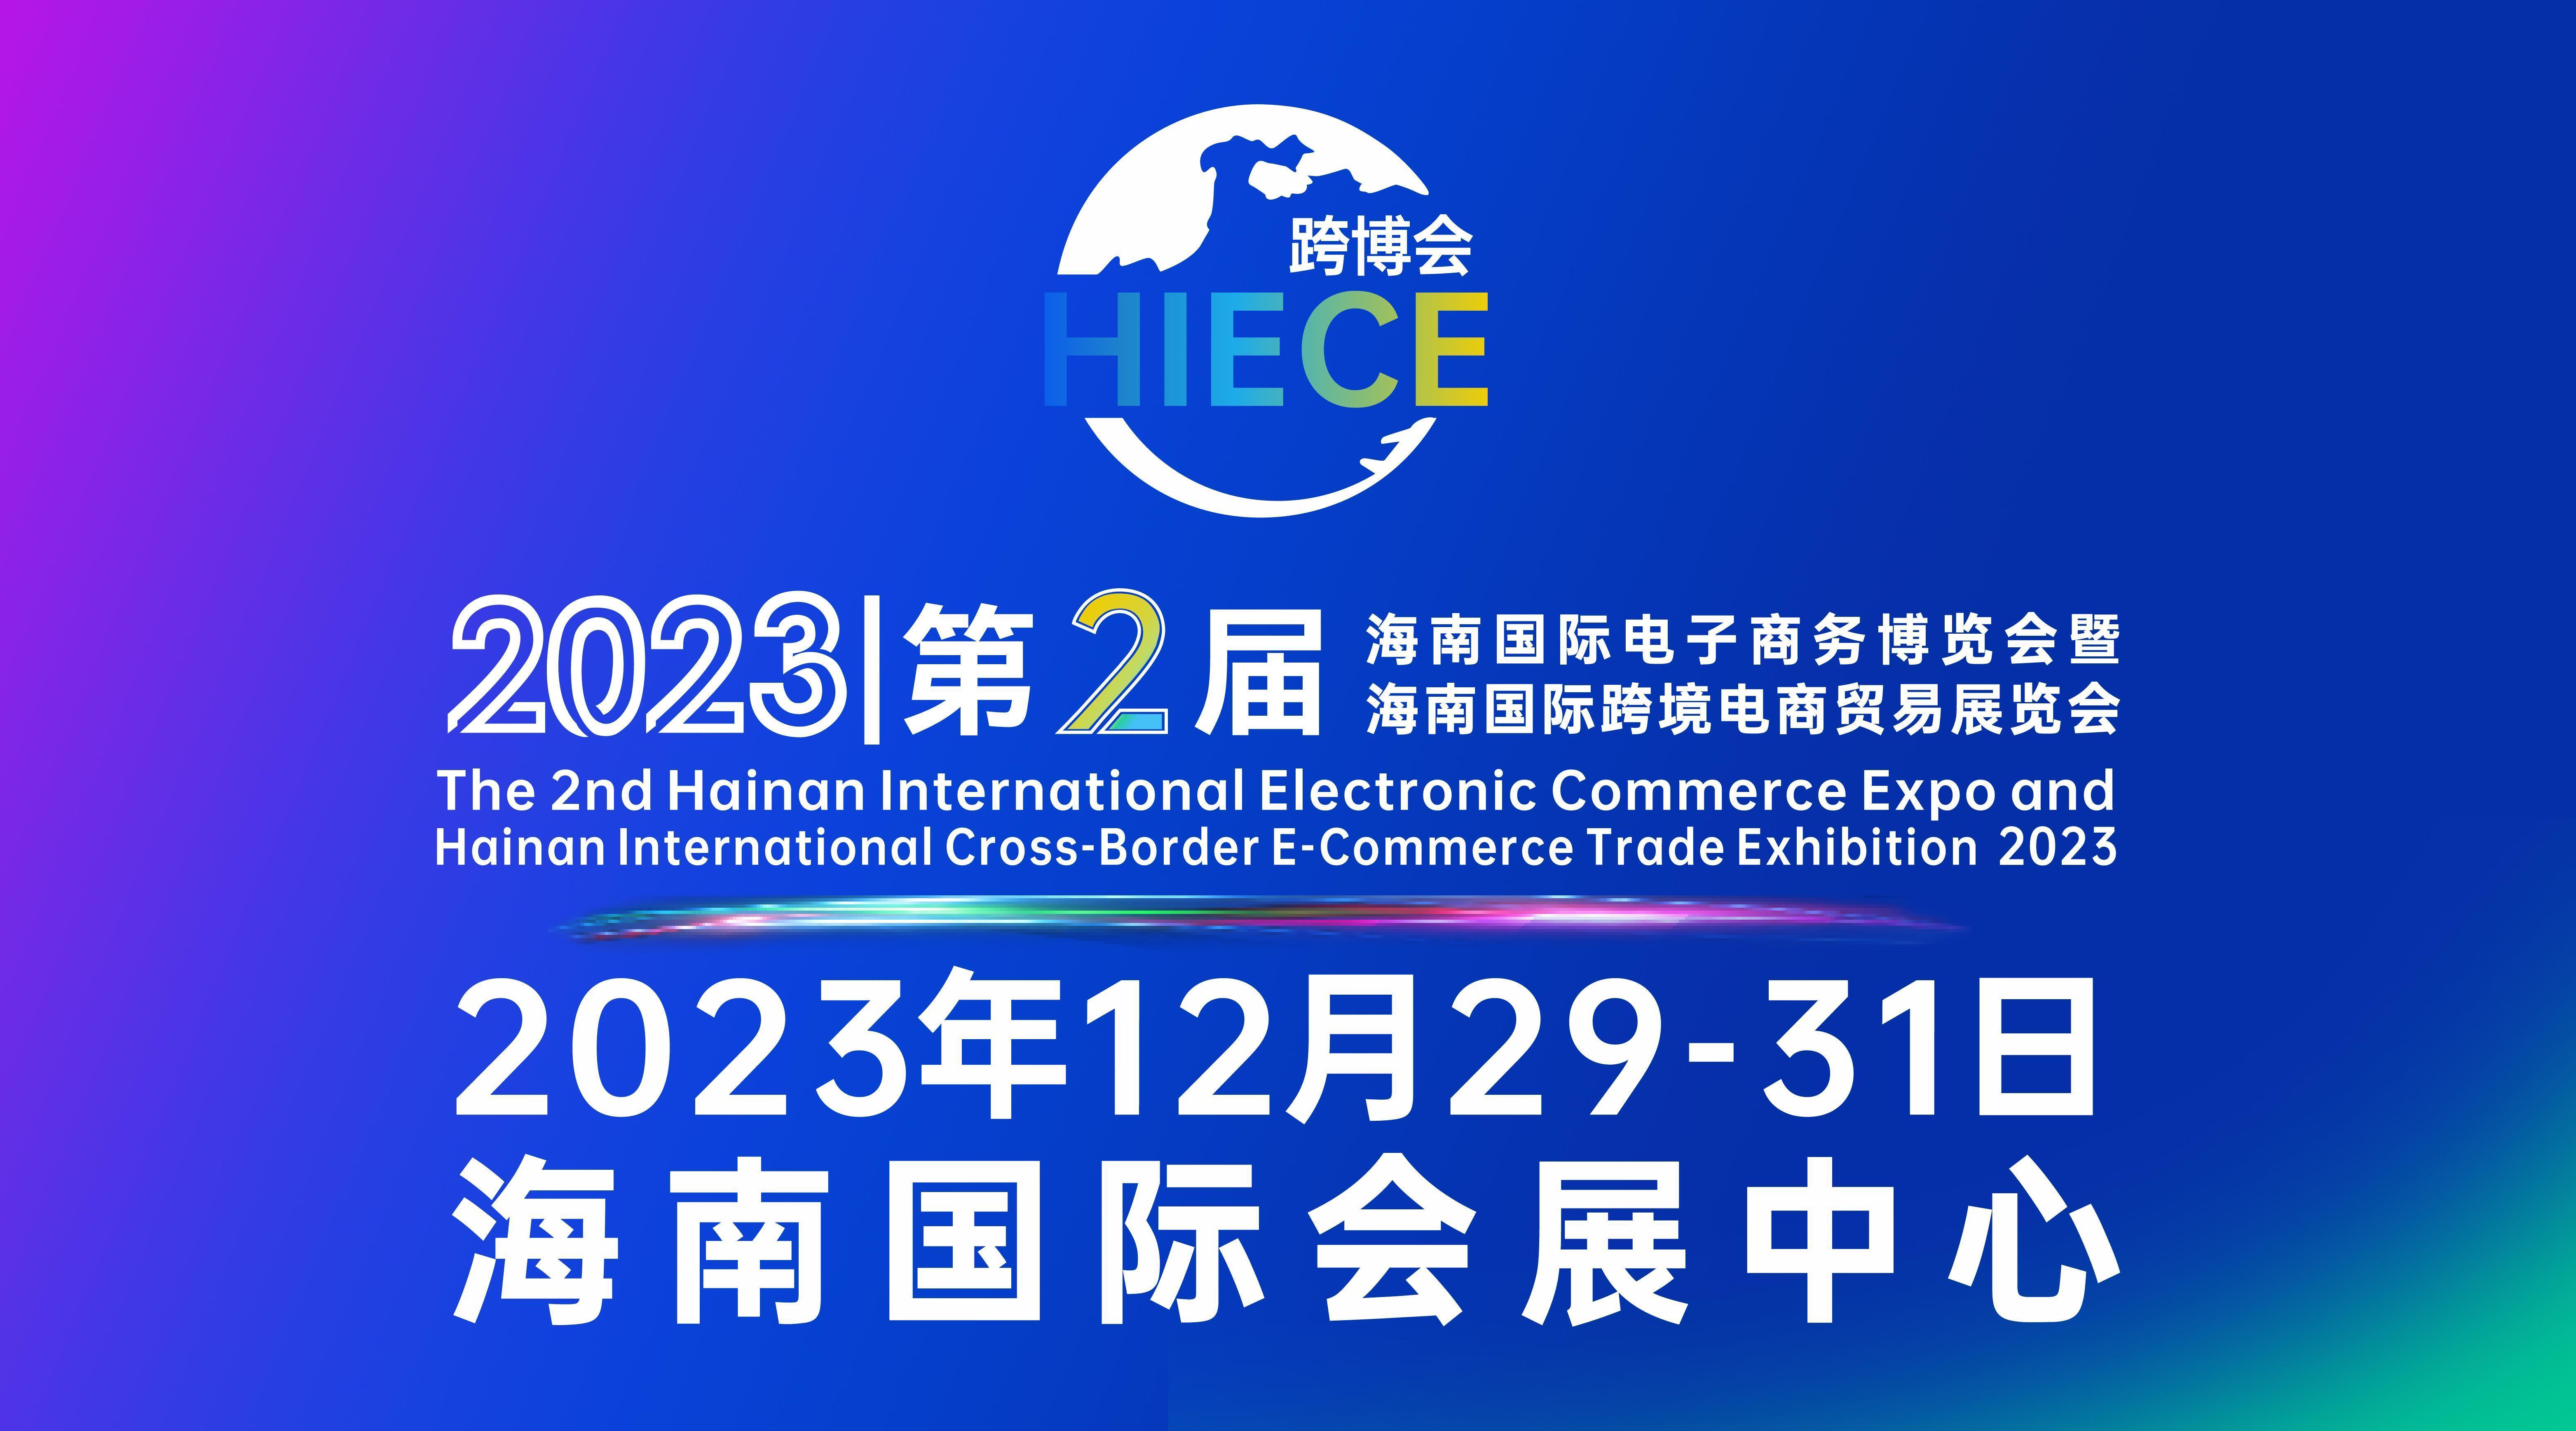 TOP platform, source factory, massive resource exhibition docking, 2023 Hainan Cross Expo help you to excavate trillion